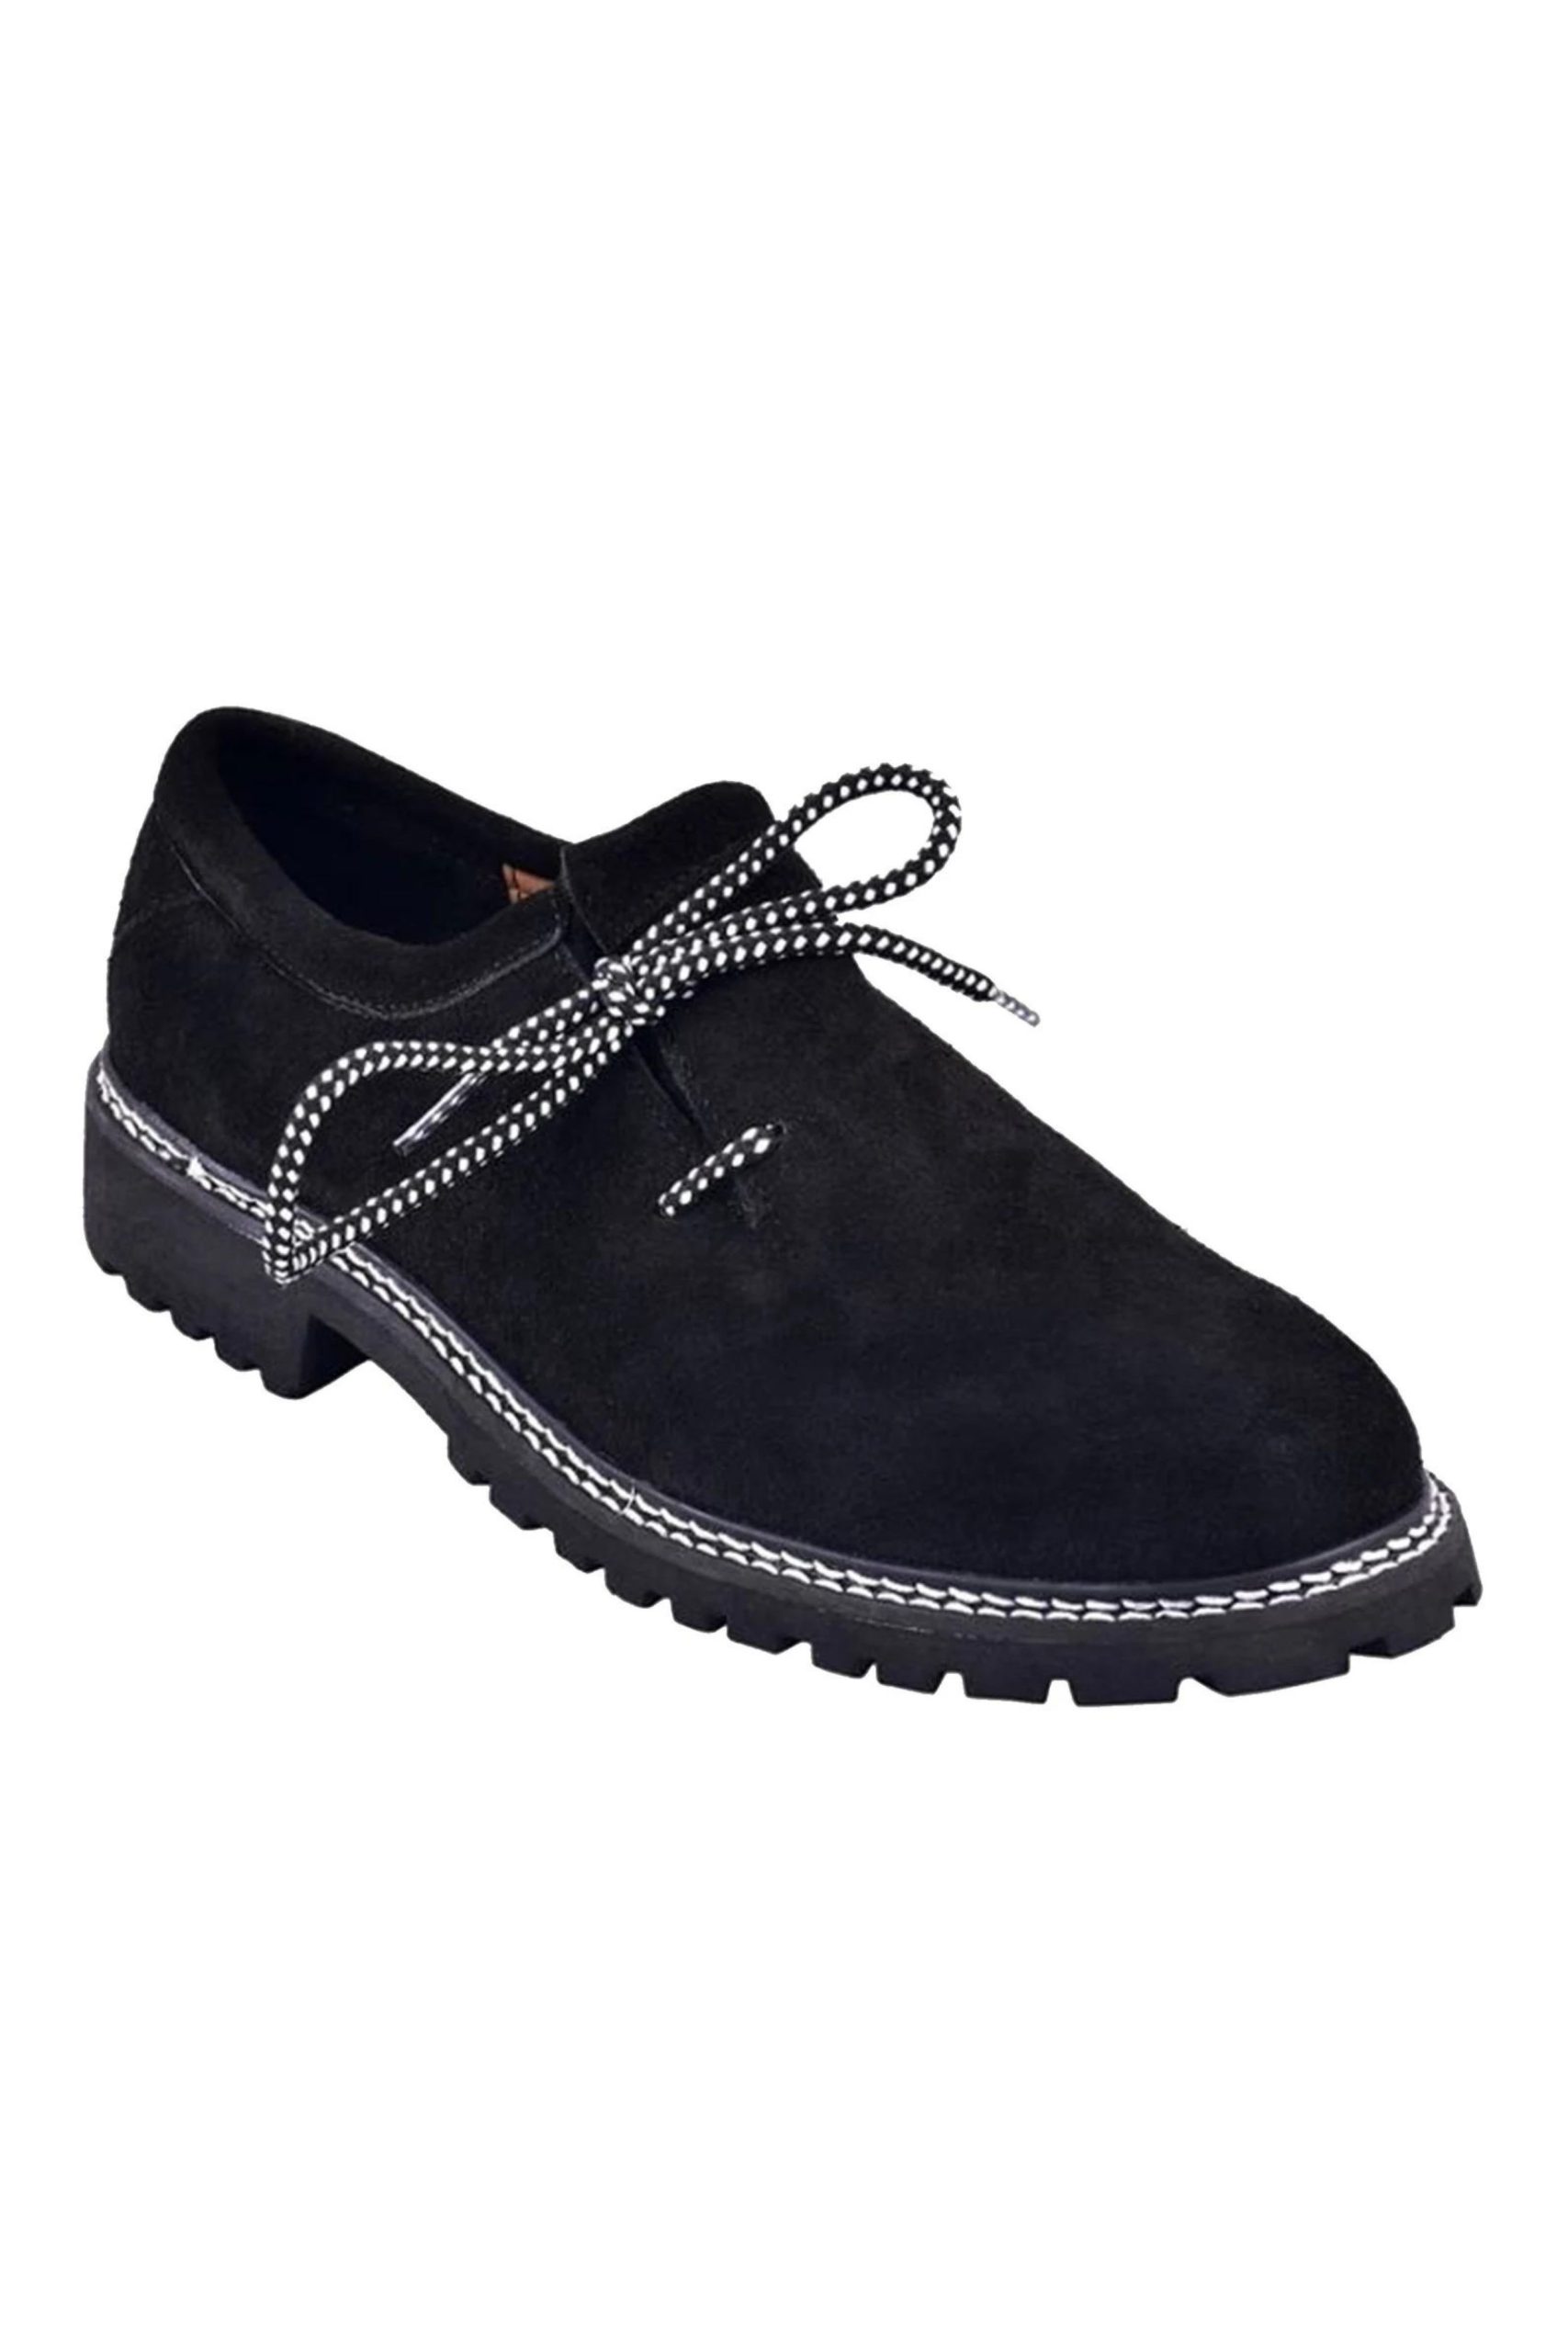 Niclas Lederhosen Shoe in black, highlighting the side view with a focus on the unique patterned laces and robust sole.